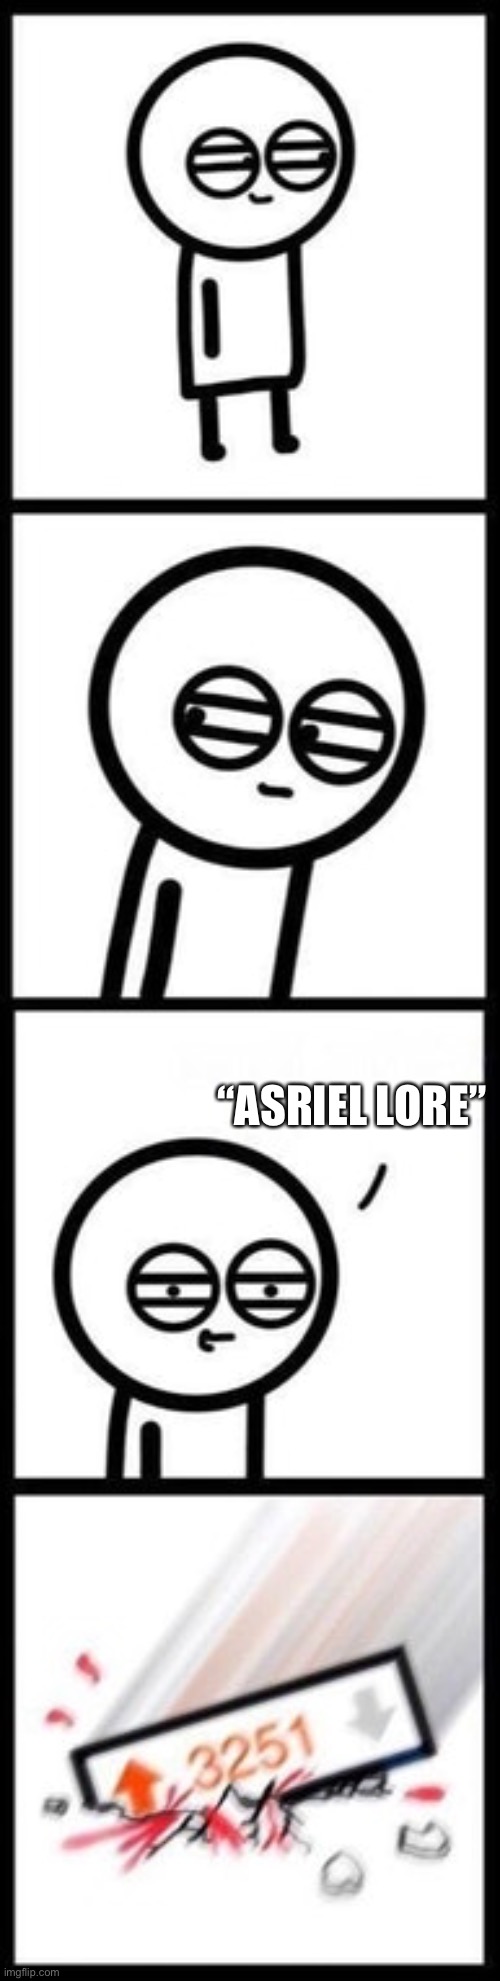 3251 upvotes | “ASRIEL LORE” | image tagged in 3251 upvotes | made w/ Imgflip meme maker